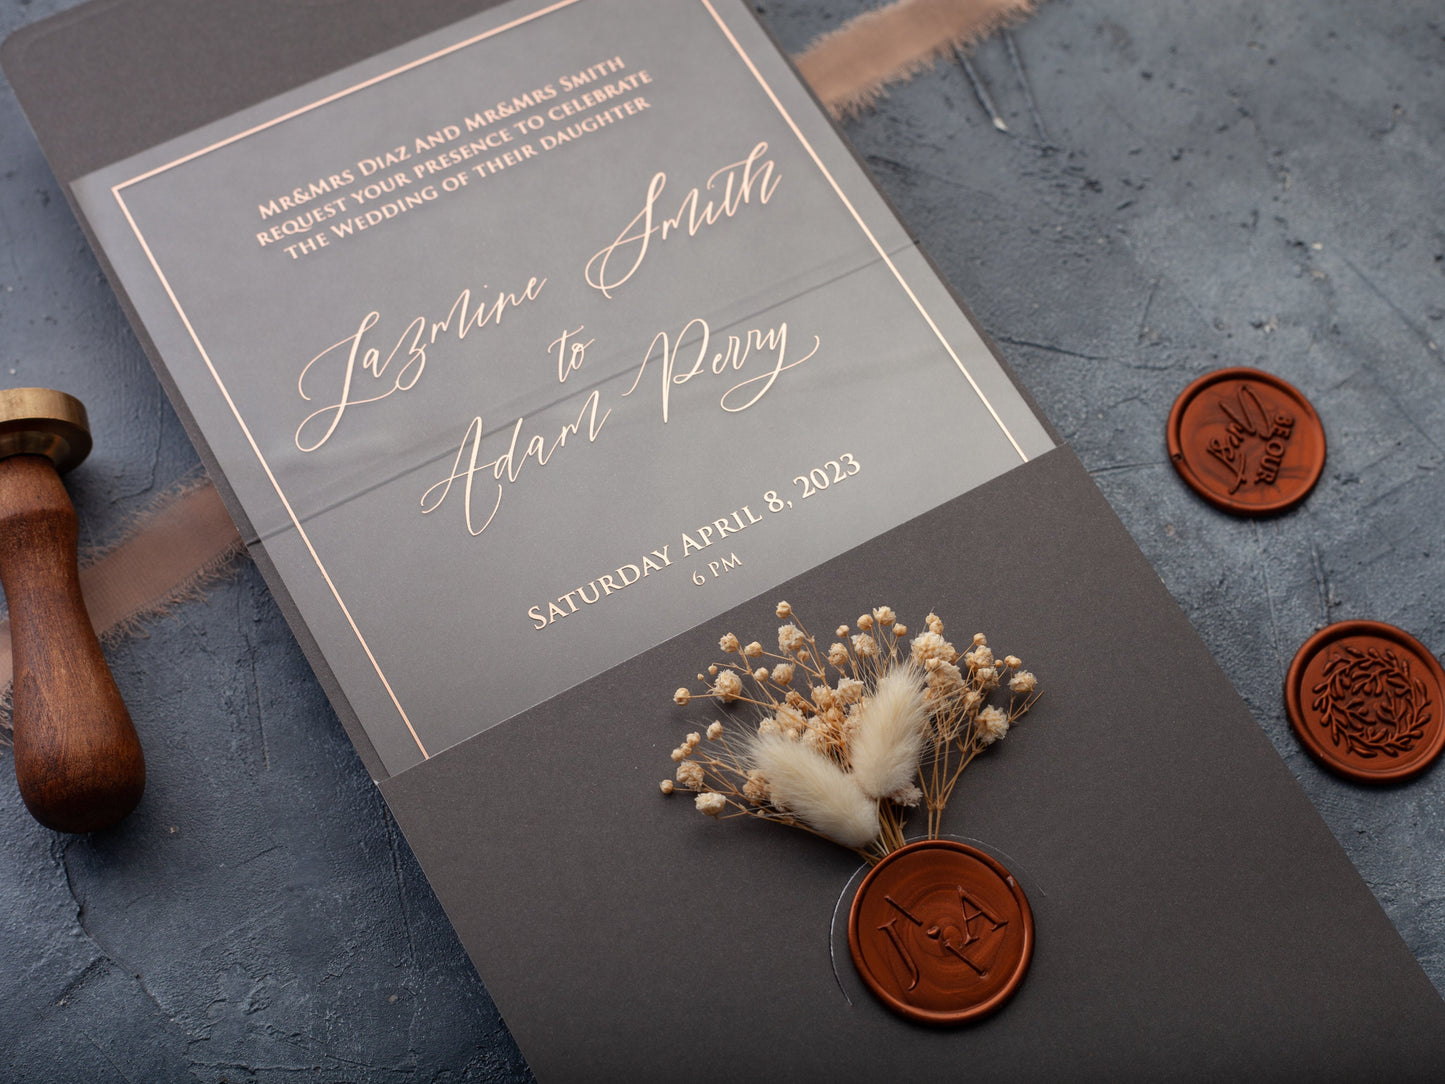 Acrylic Wedding Invitation with Wax Seal and Dried Flowers, Gray and Rose Gold Foil Acrylic Invite